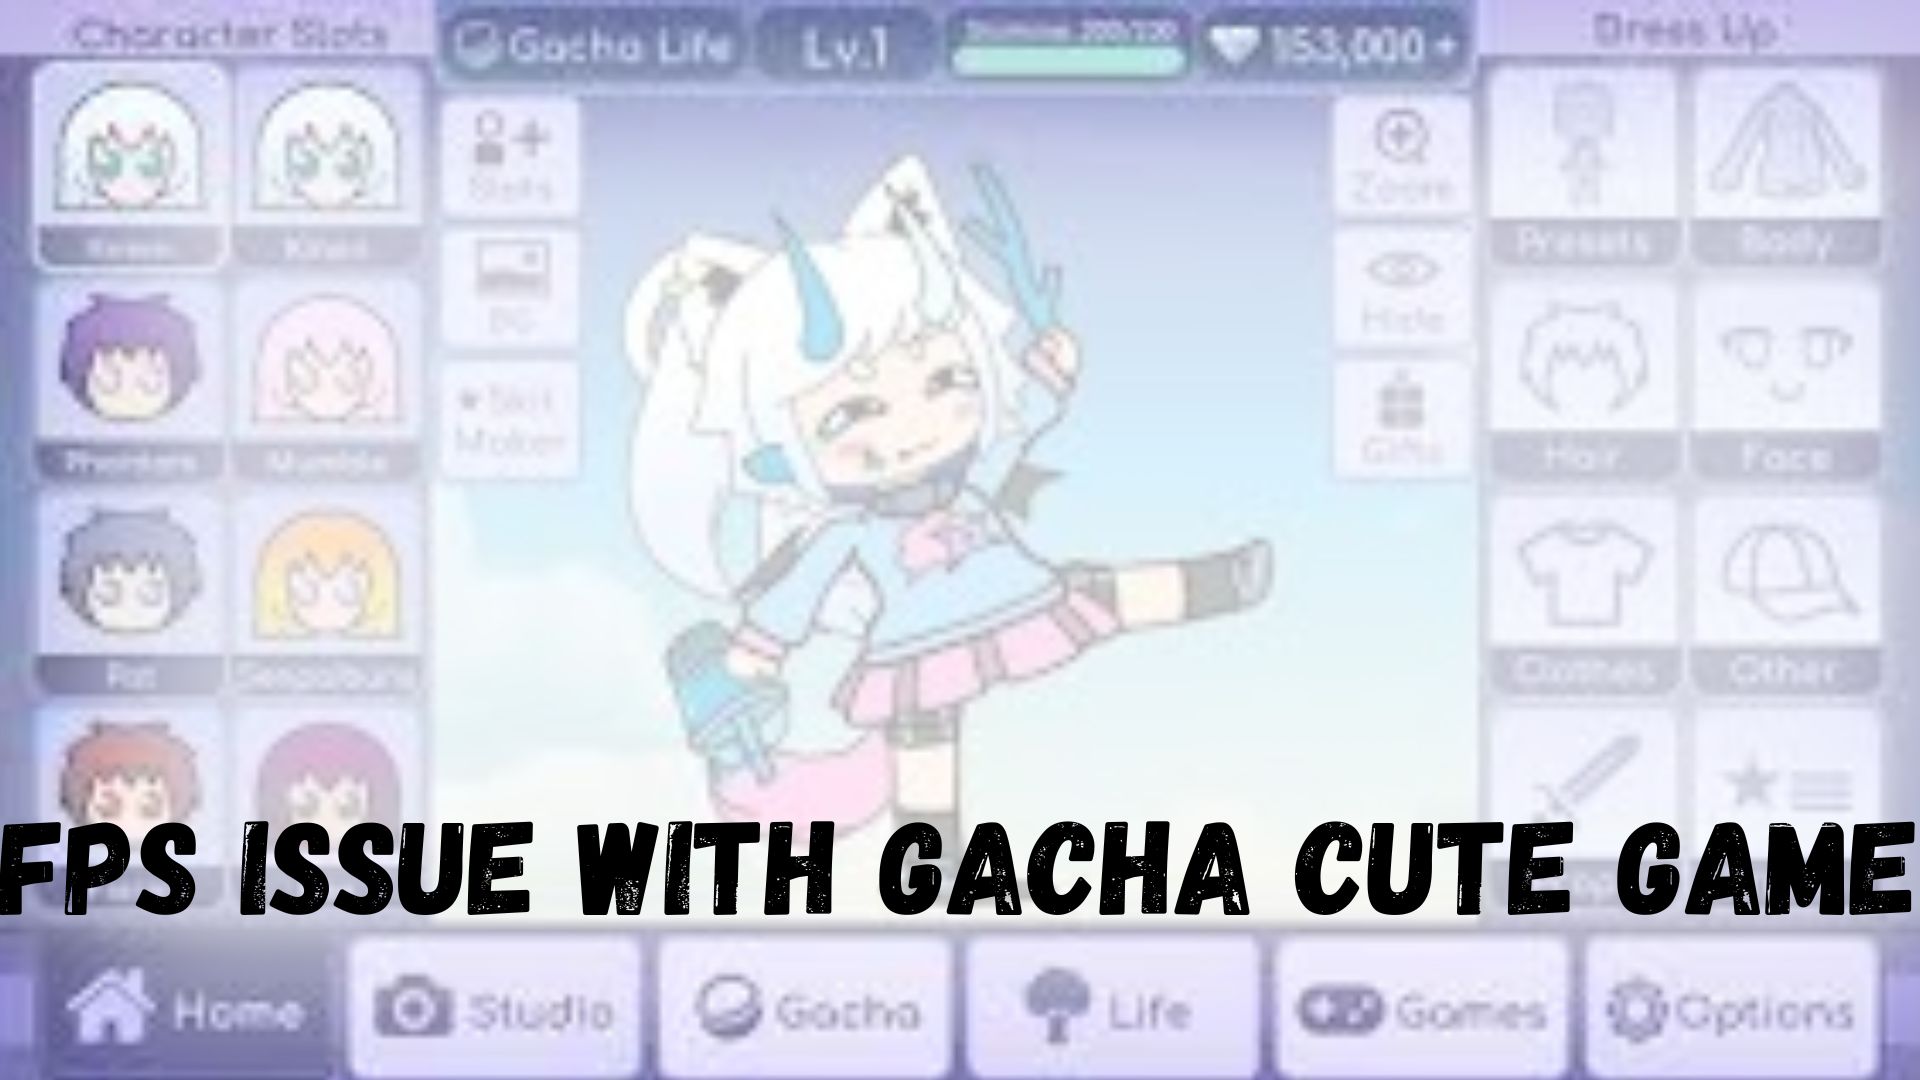 Gacha Club Android Gameplay [1080p/60fps] 